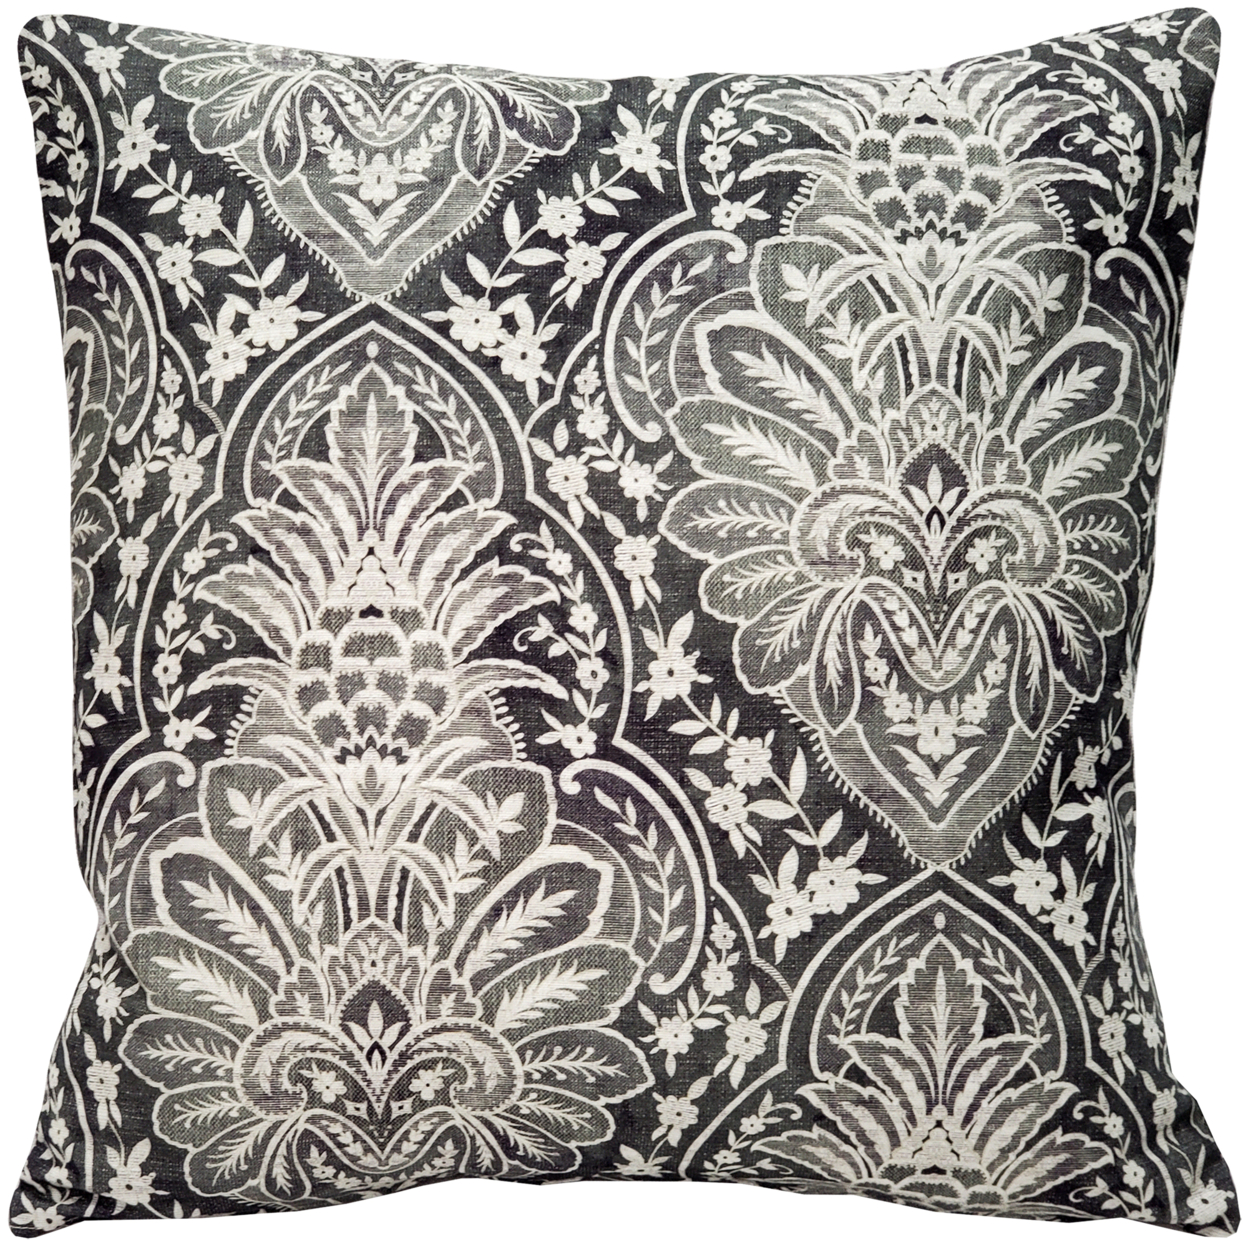 Leone Damask Dark Gray Throw Pillow 21x21 Inches Square, Complete Pillow With Polyfill Pillow Insert